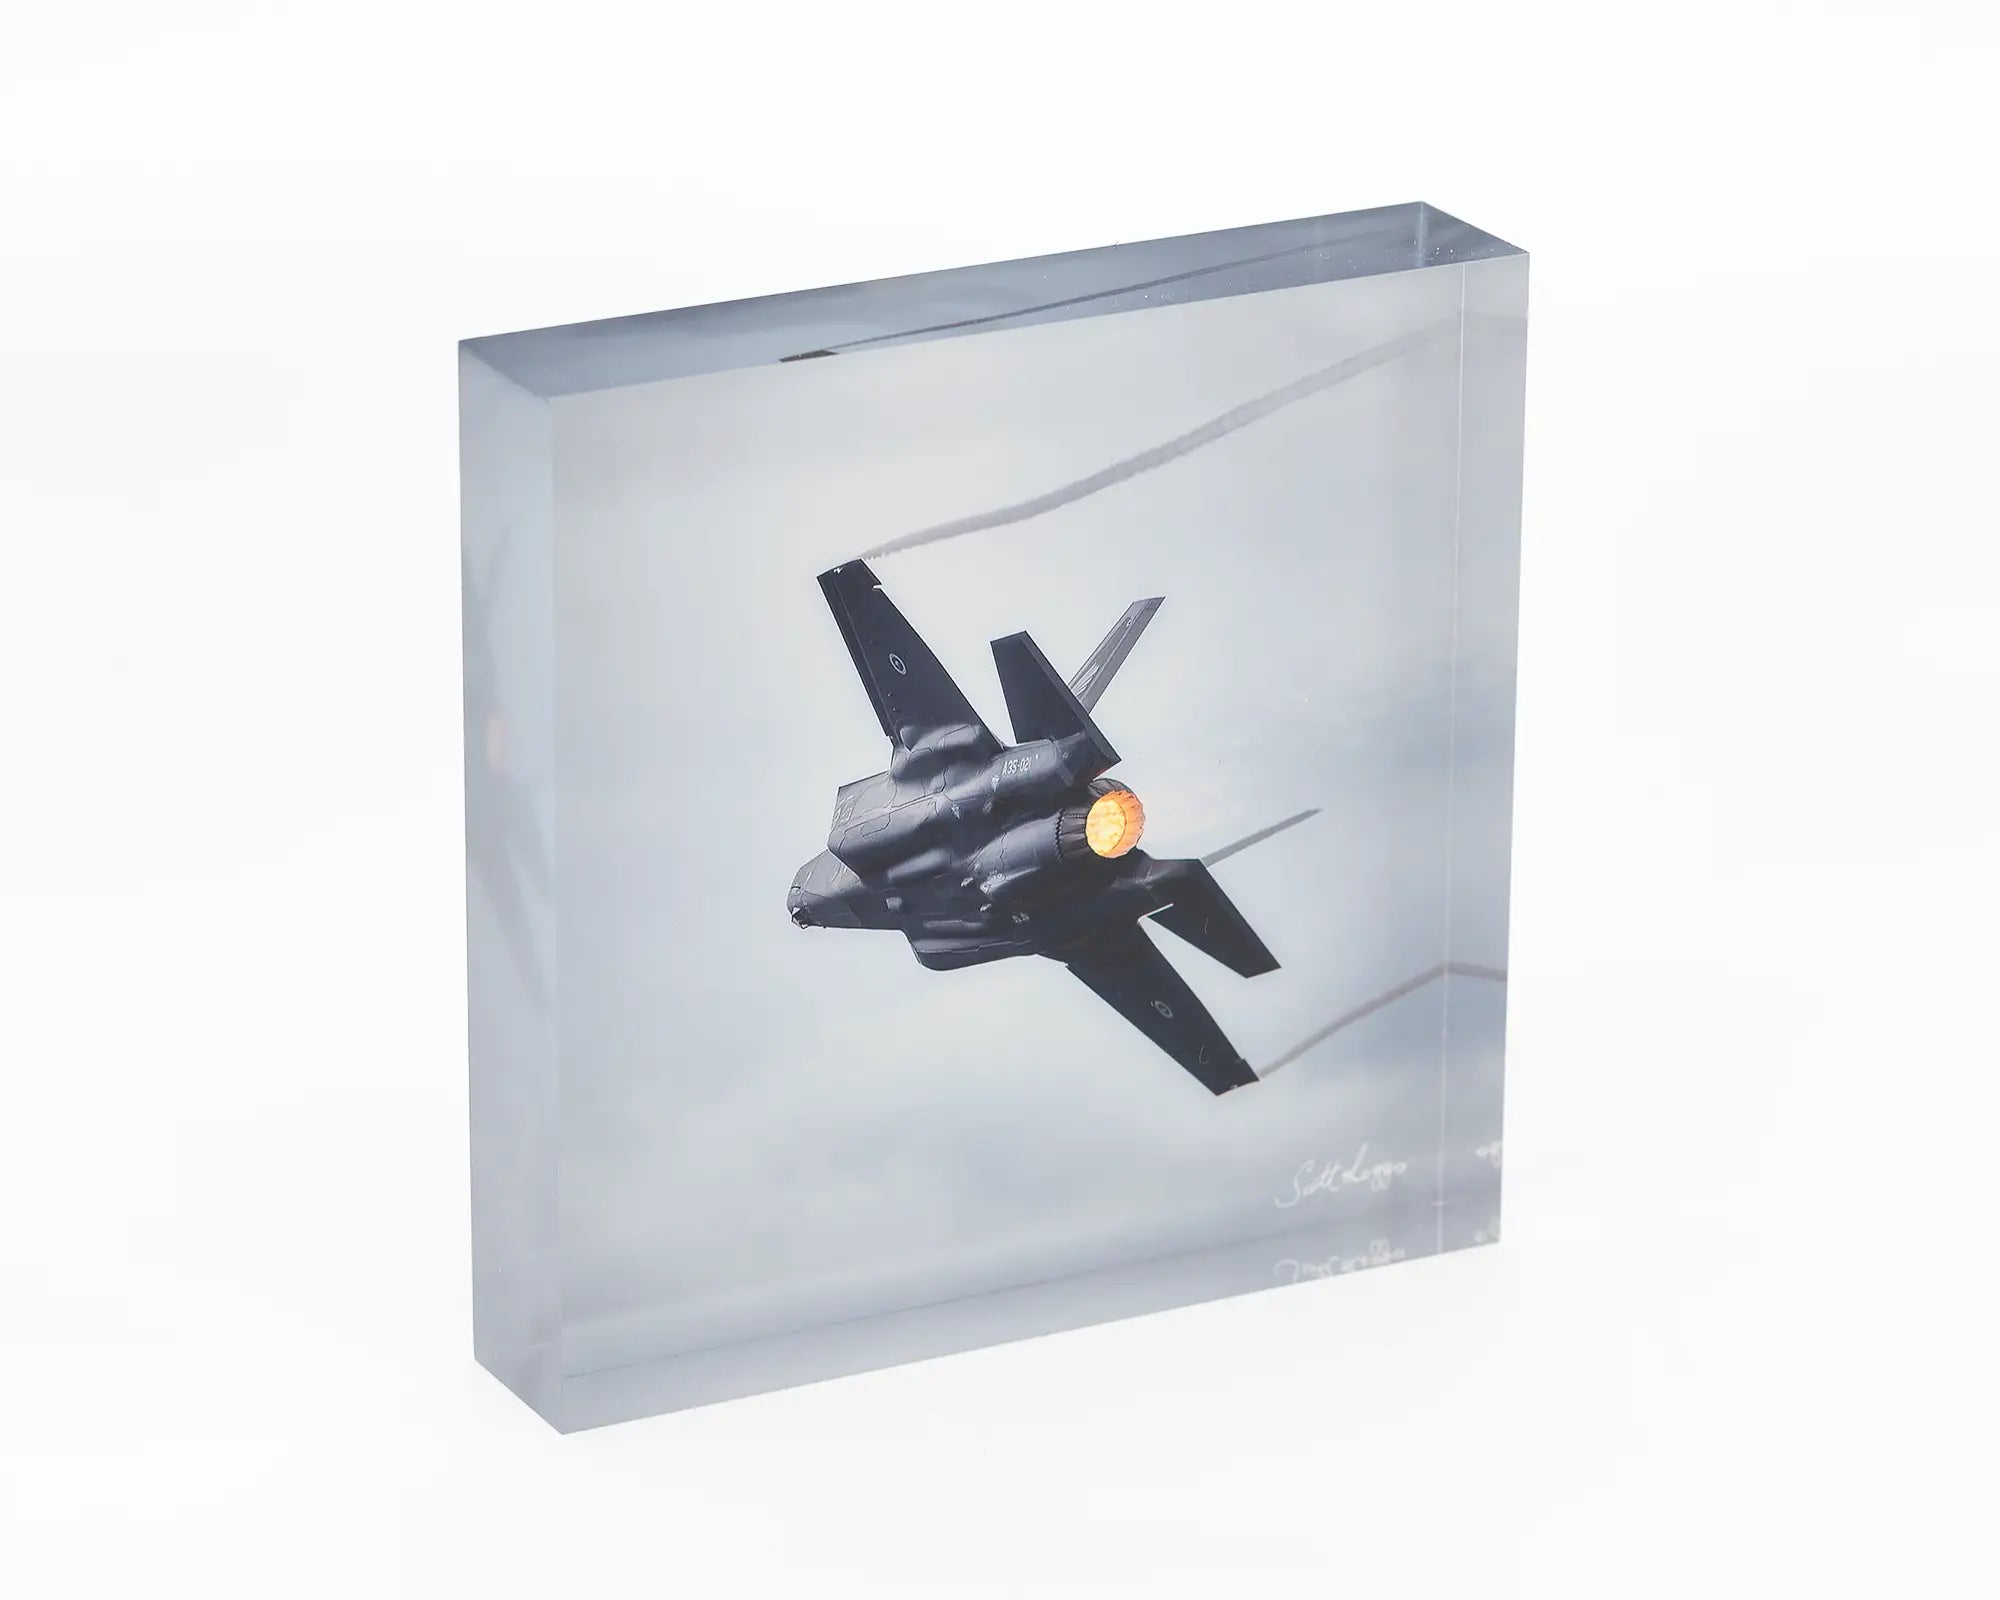 Lit aviation themed acrylic block - F-35 Joint Strike Fighter in afterburner. 